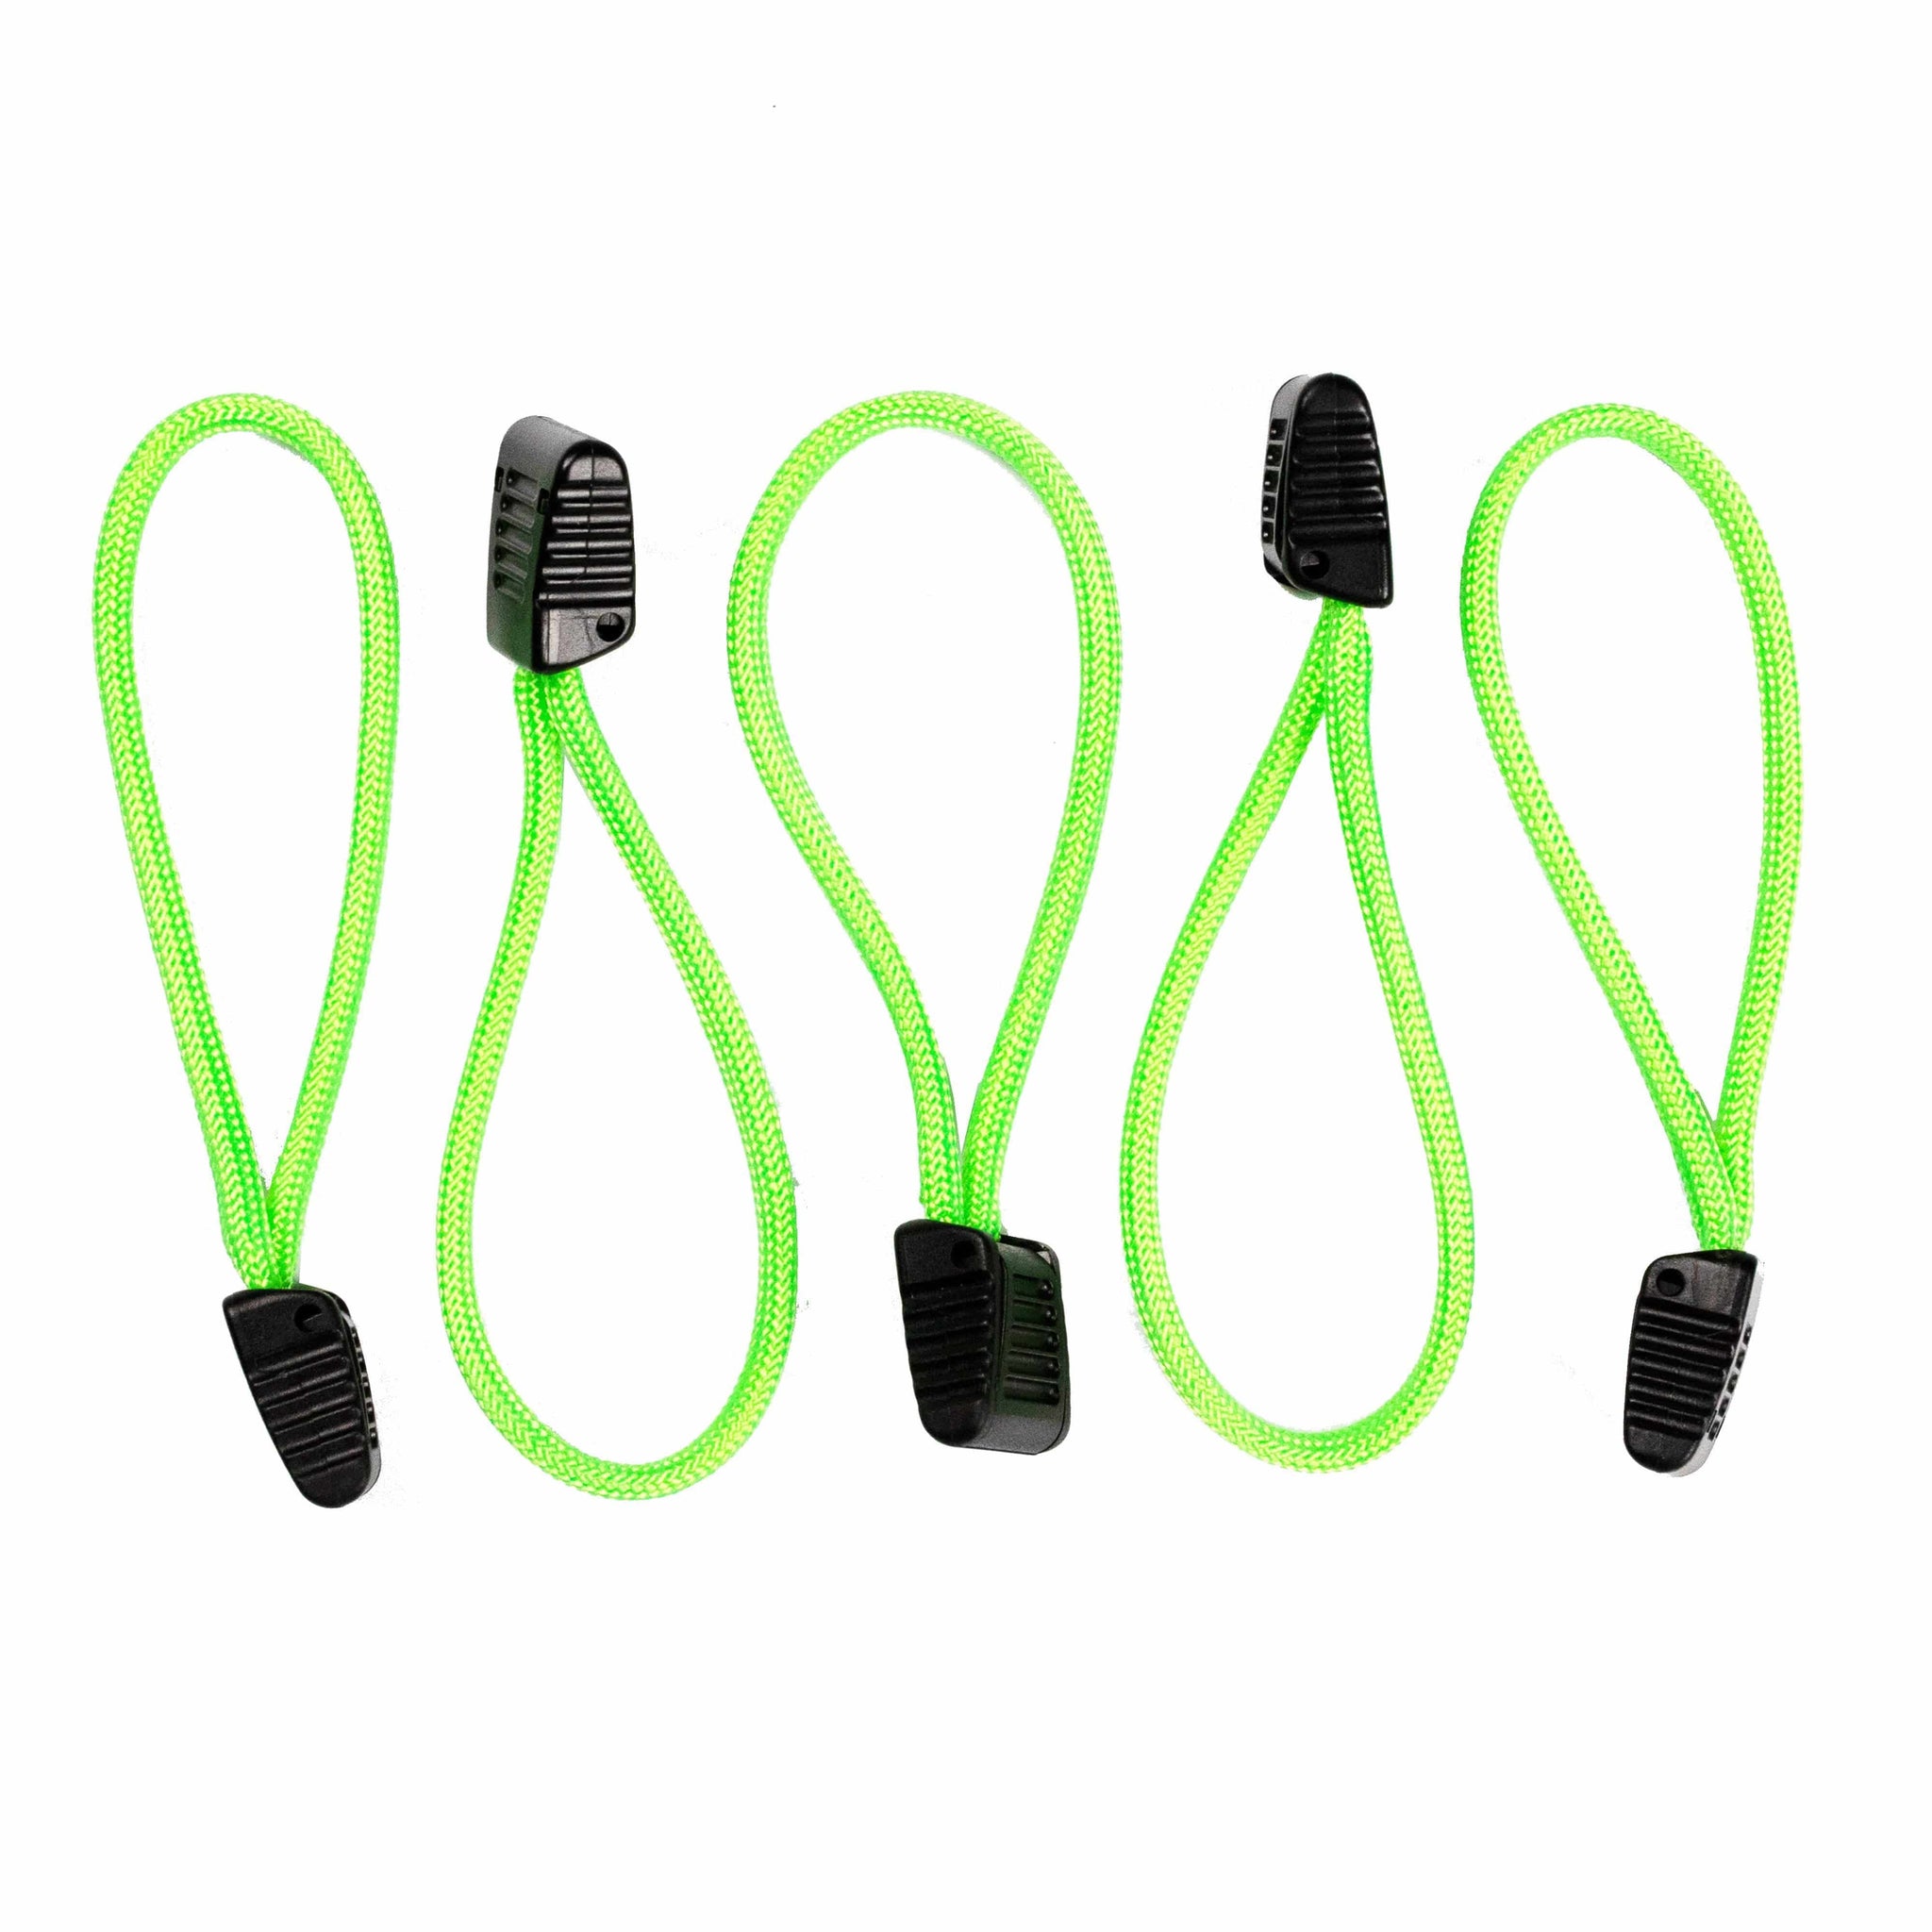 Bartact Paracord Zipper Pulls w/ Plastic Pull - Qty 3 or 5 - Made in USA 550 Paracord, Green